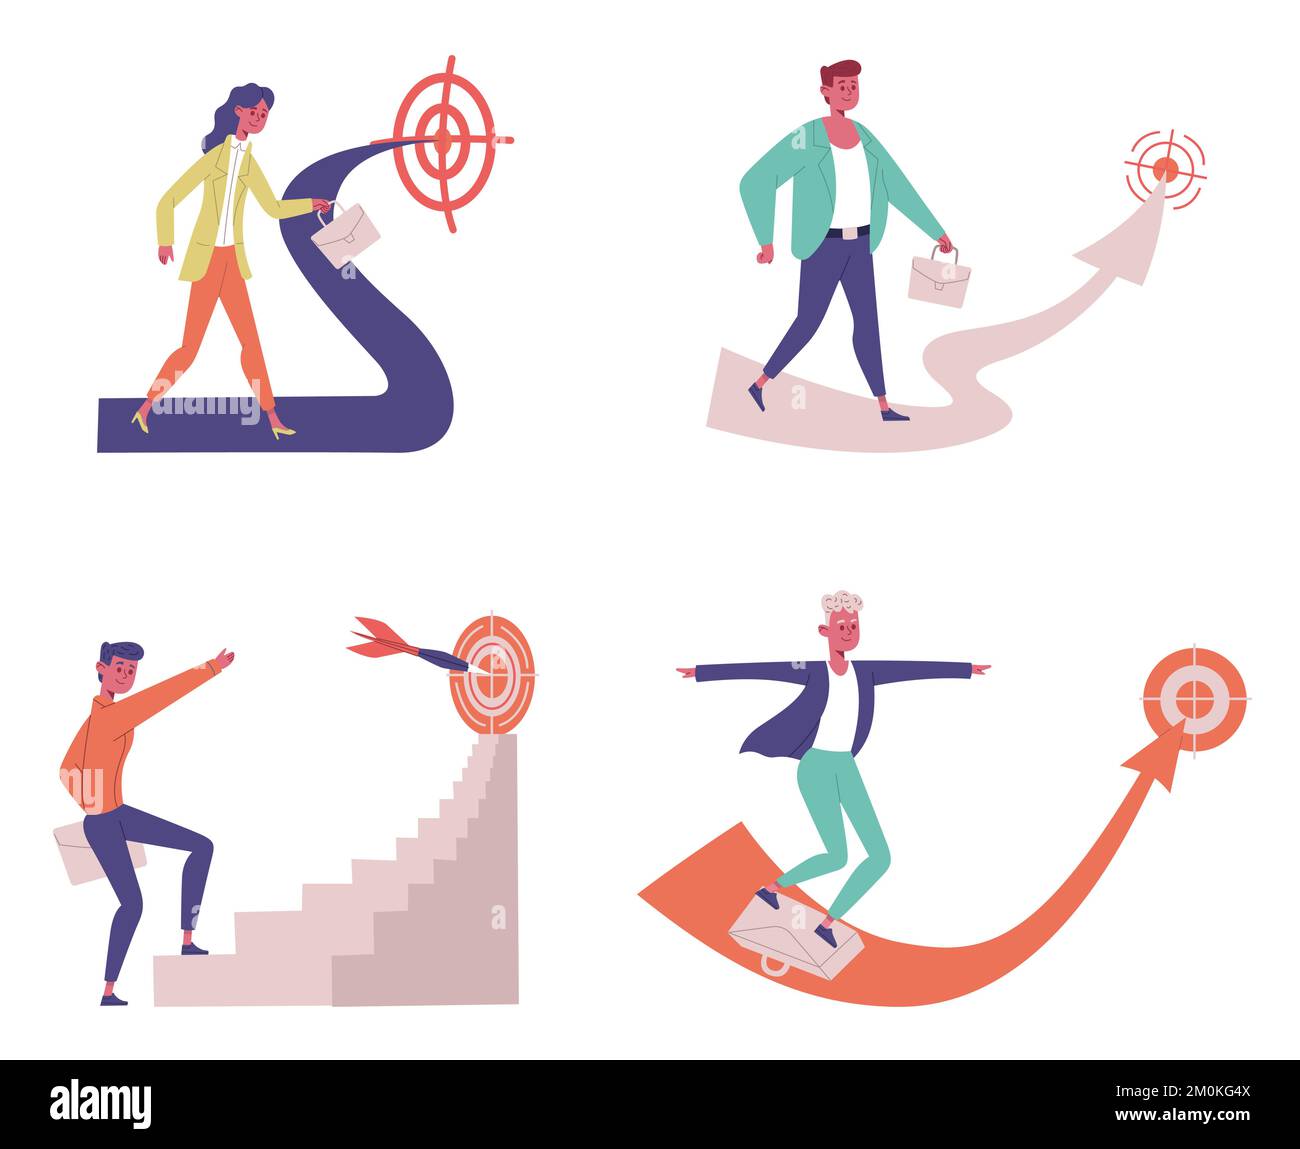 Business goals achievements. Female and male office workers going to aim, employees getting success at work Stock Vector